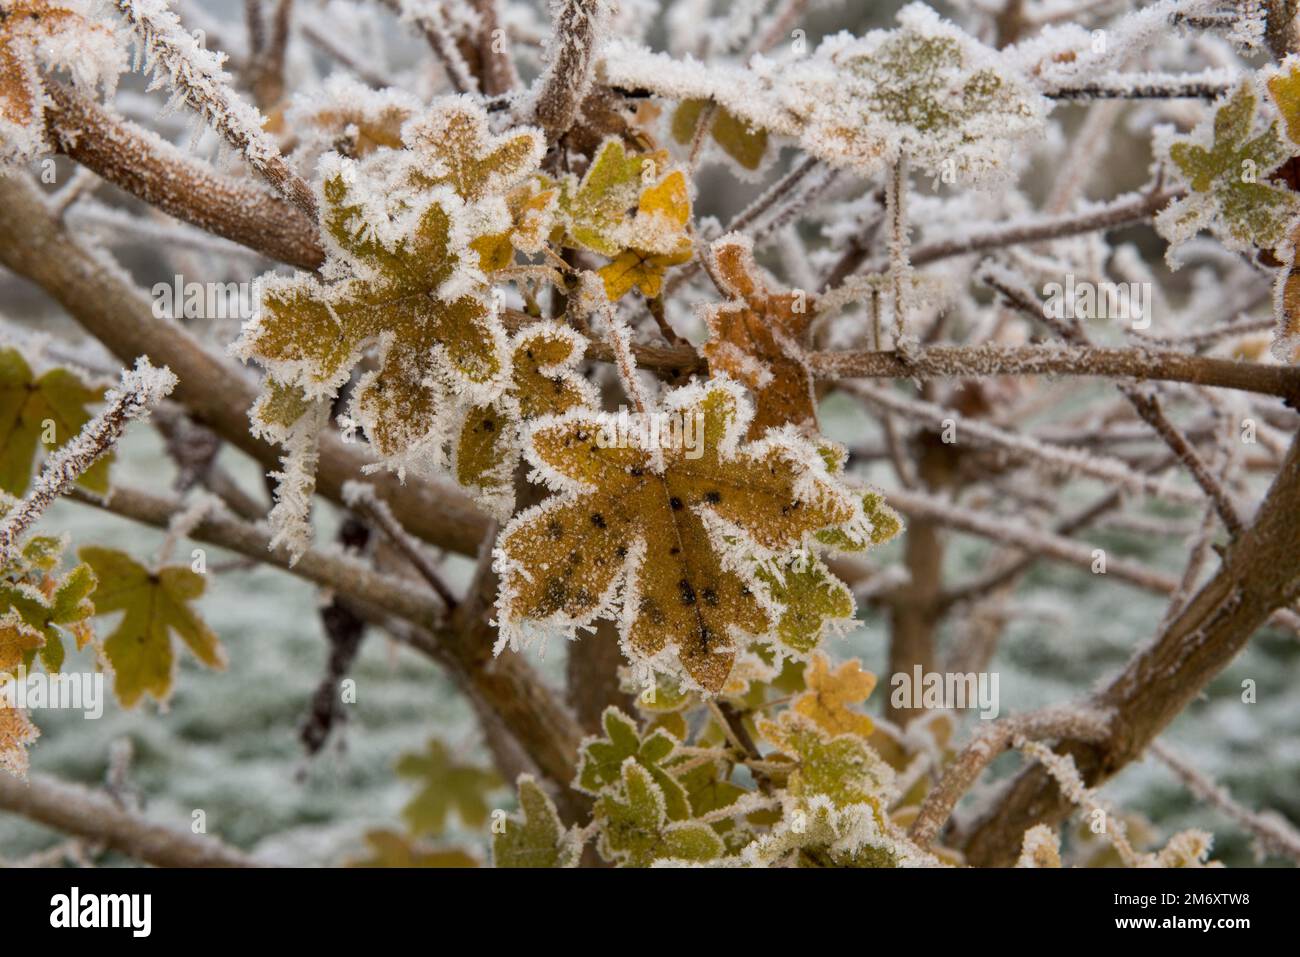 Hoar frost, rime ice, forning on the autumnal leaves and branches of a field maple (Acer campestre) hedgeon a cold grey winter morning, Berkshire, Dec Stock Photo